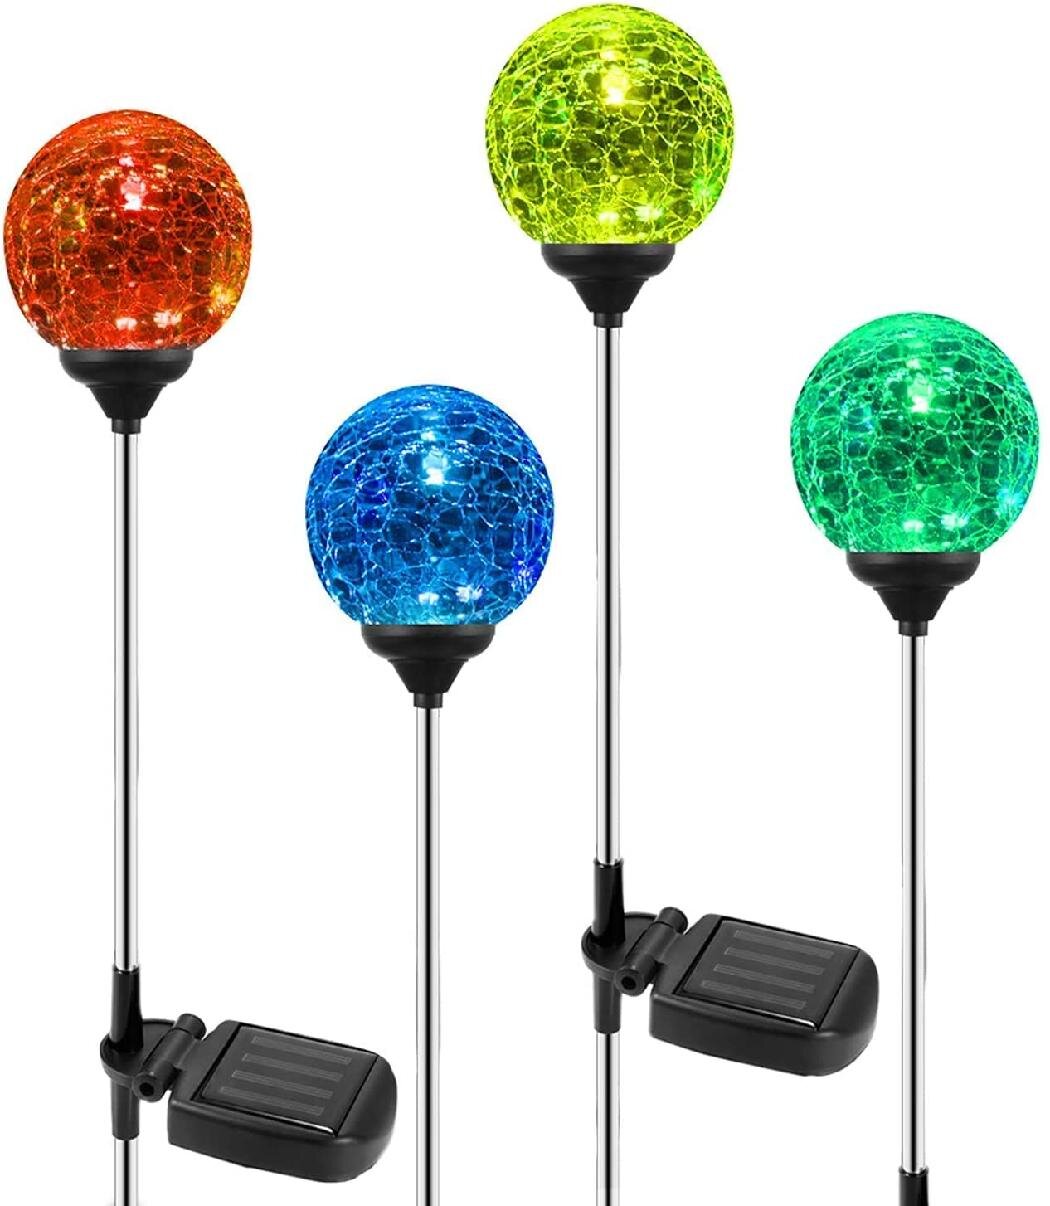 STAINLESS STEEL SOLAR POWERED COLOR CHANGING STAKE LED LIGHTS GARDEN YARD DECOR 